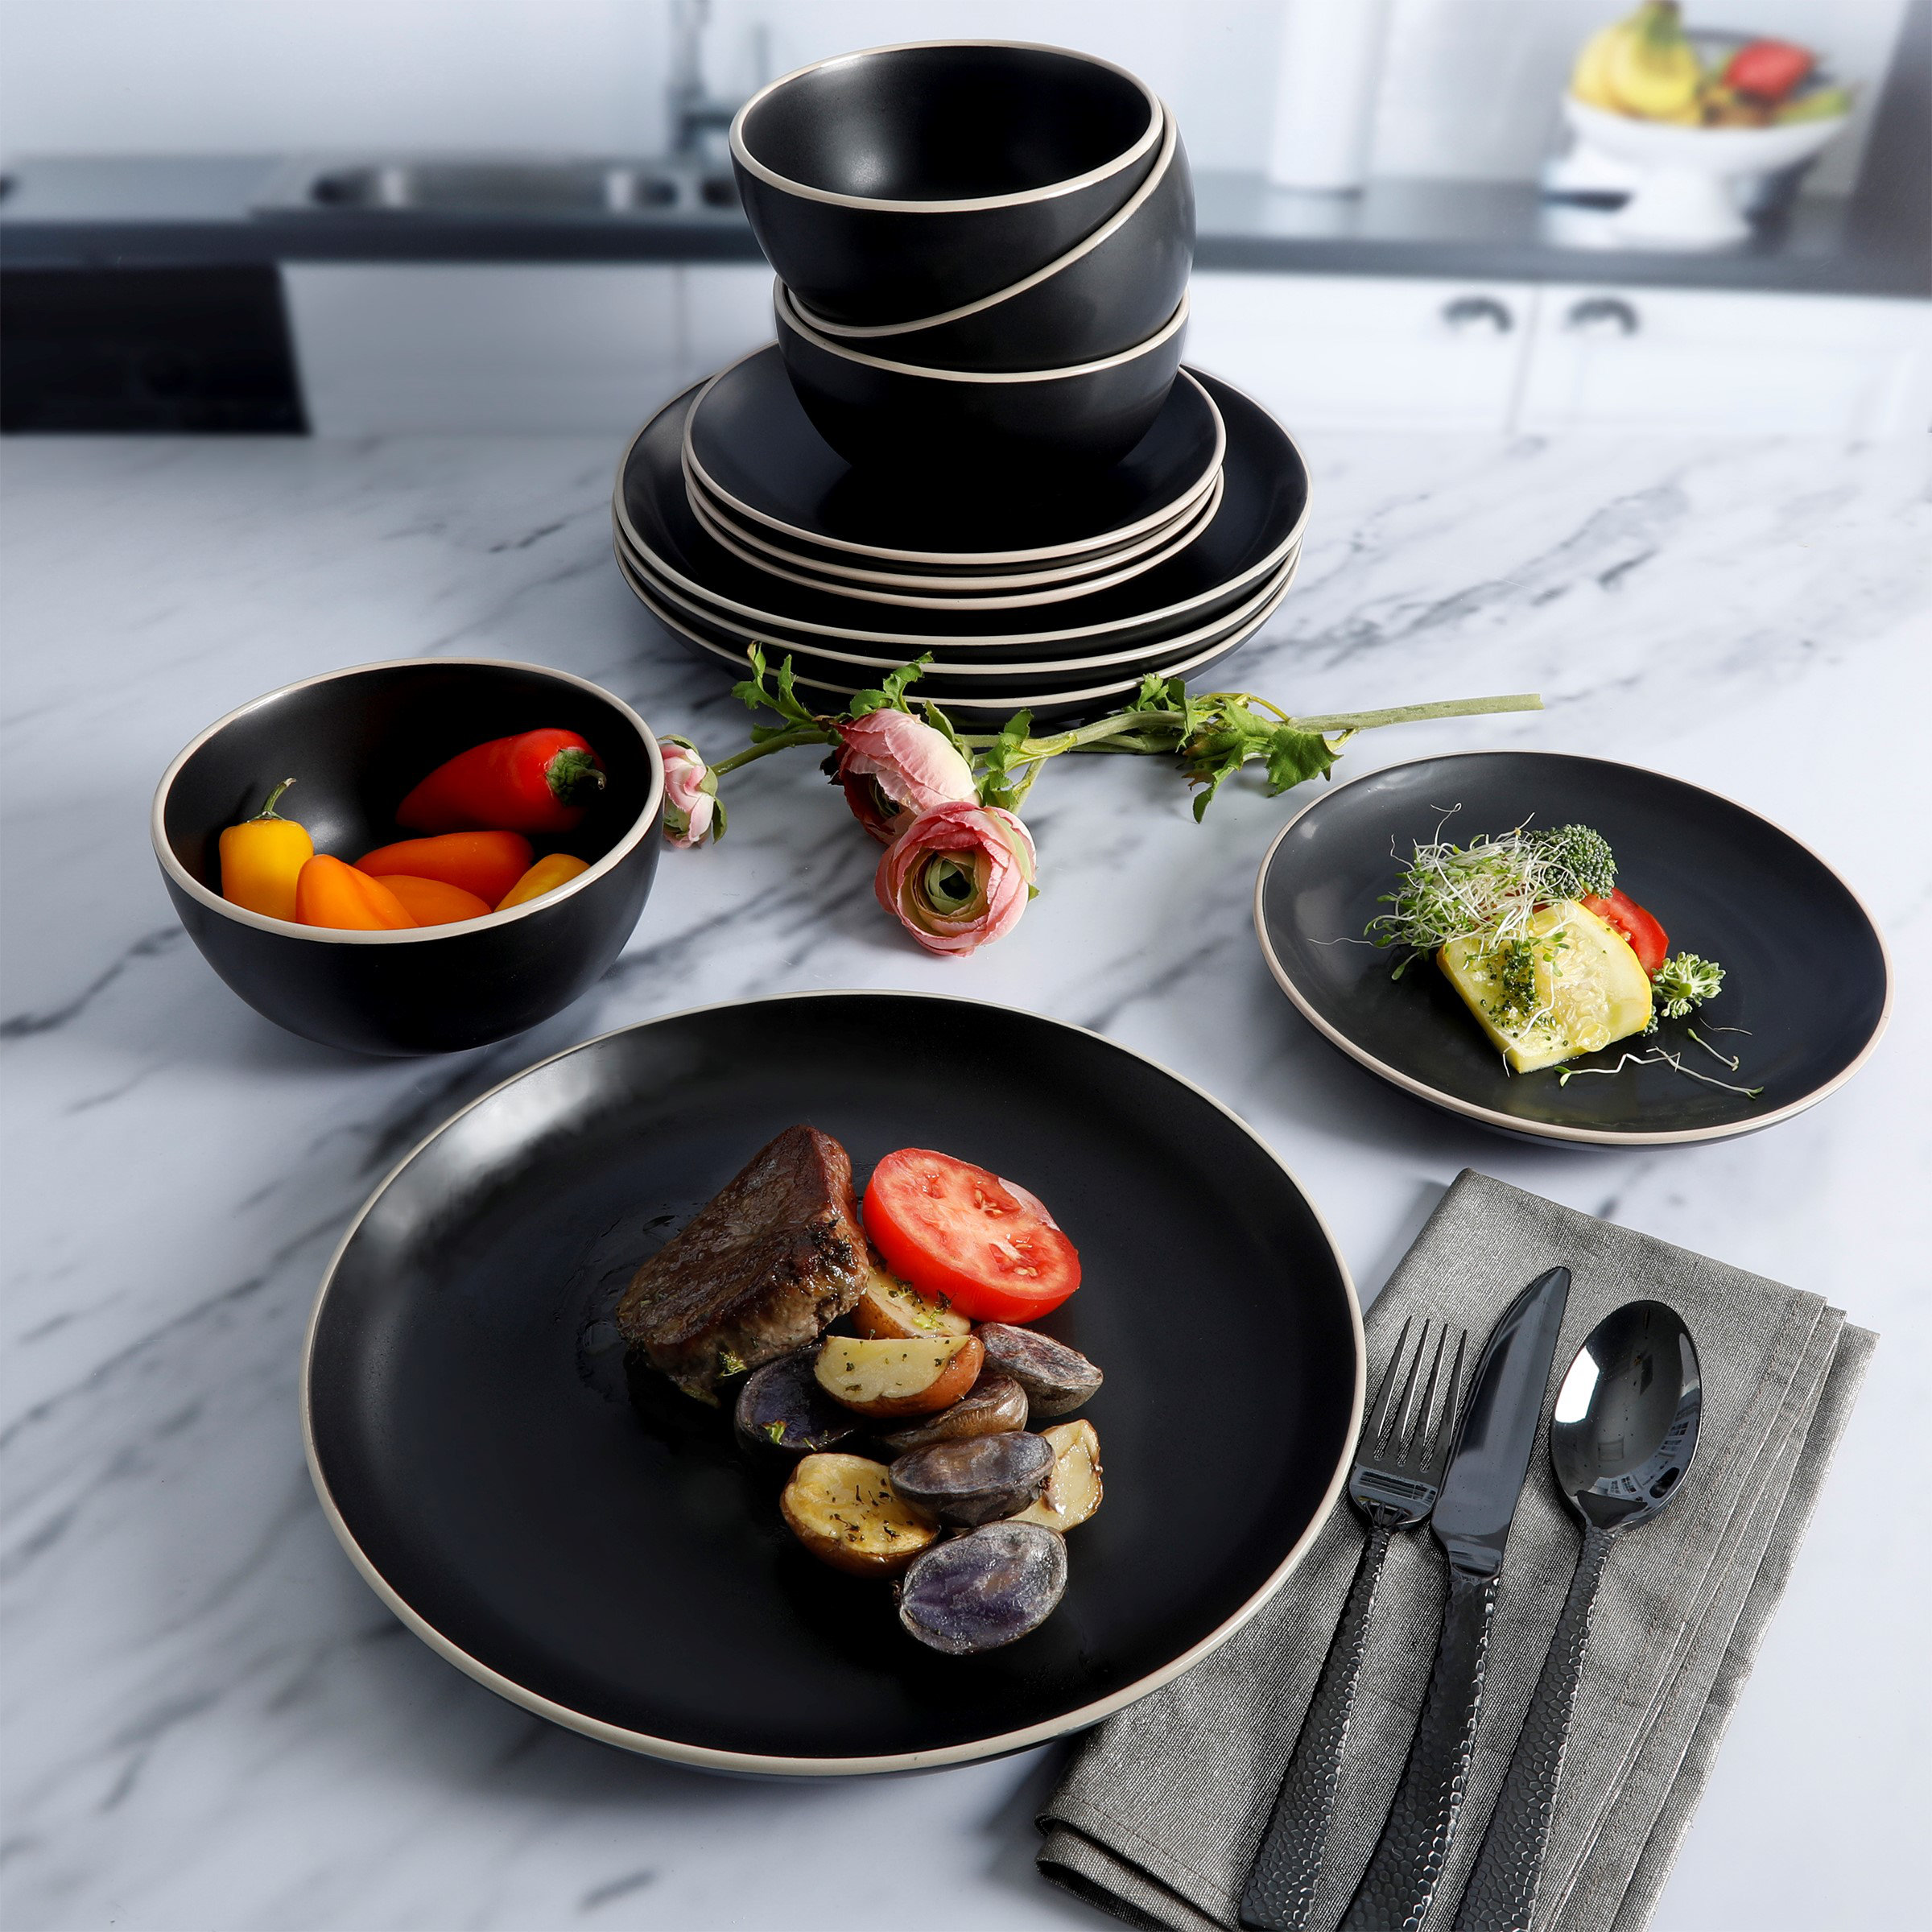 Gibson Home Oslo Porcelain Chip and Scratch Resistant Dinnerware